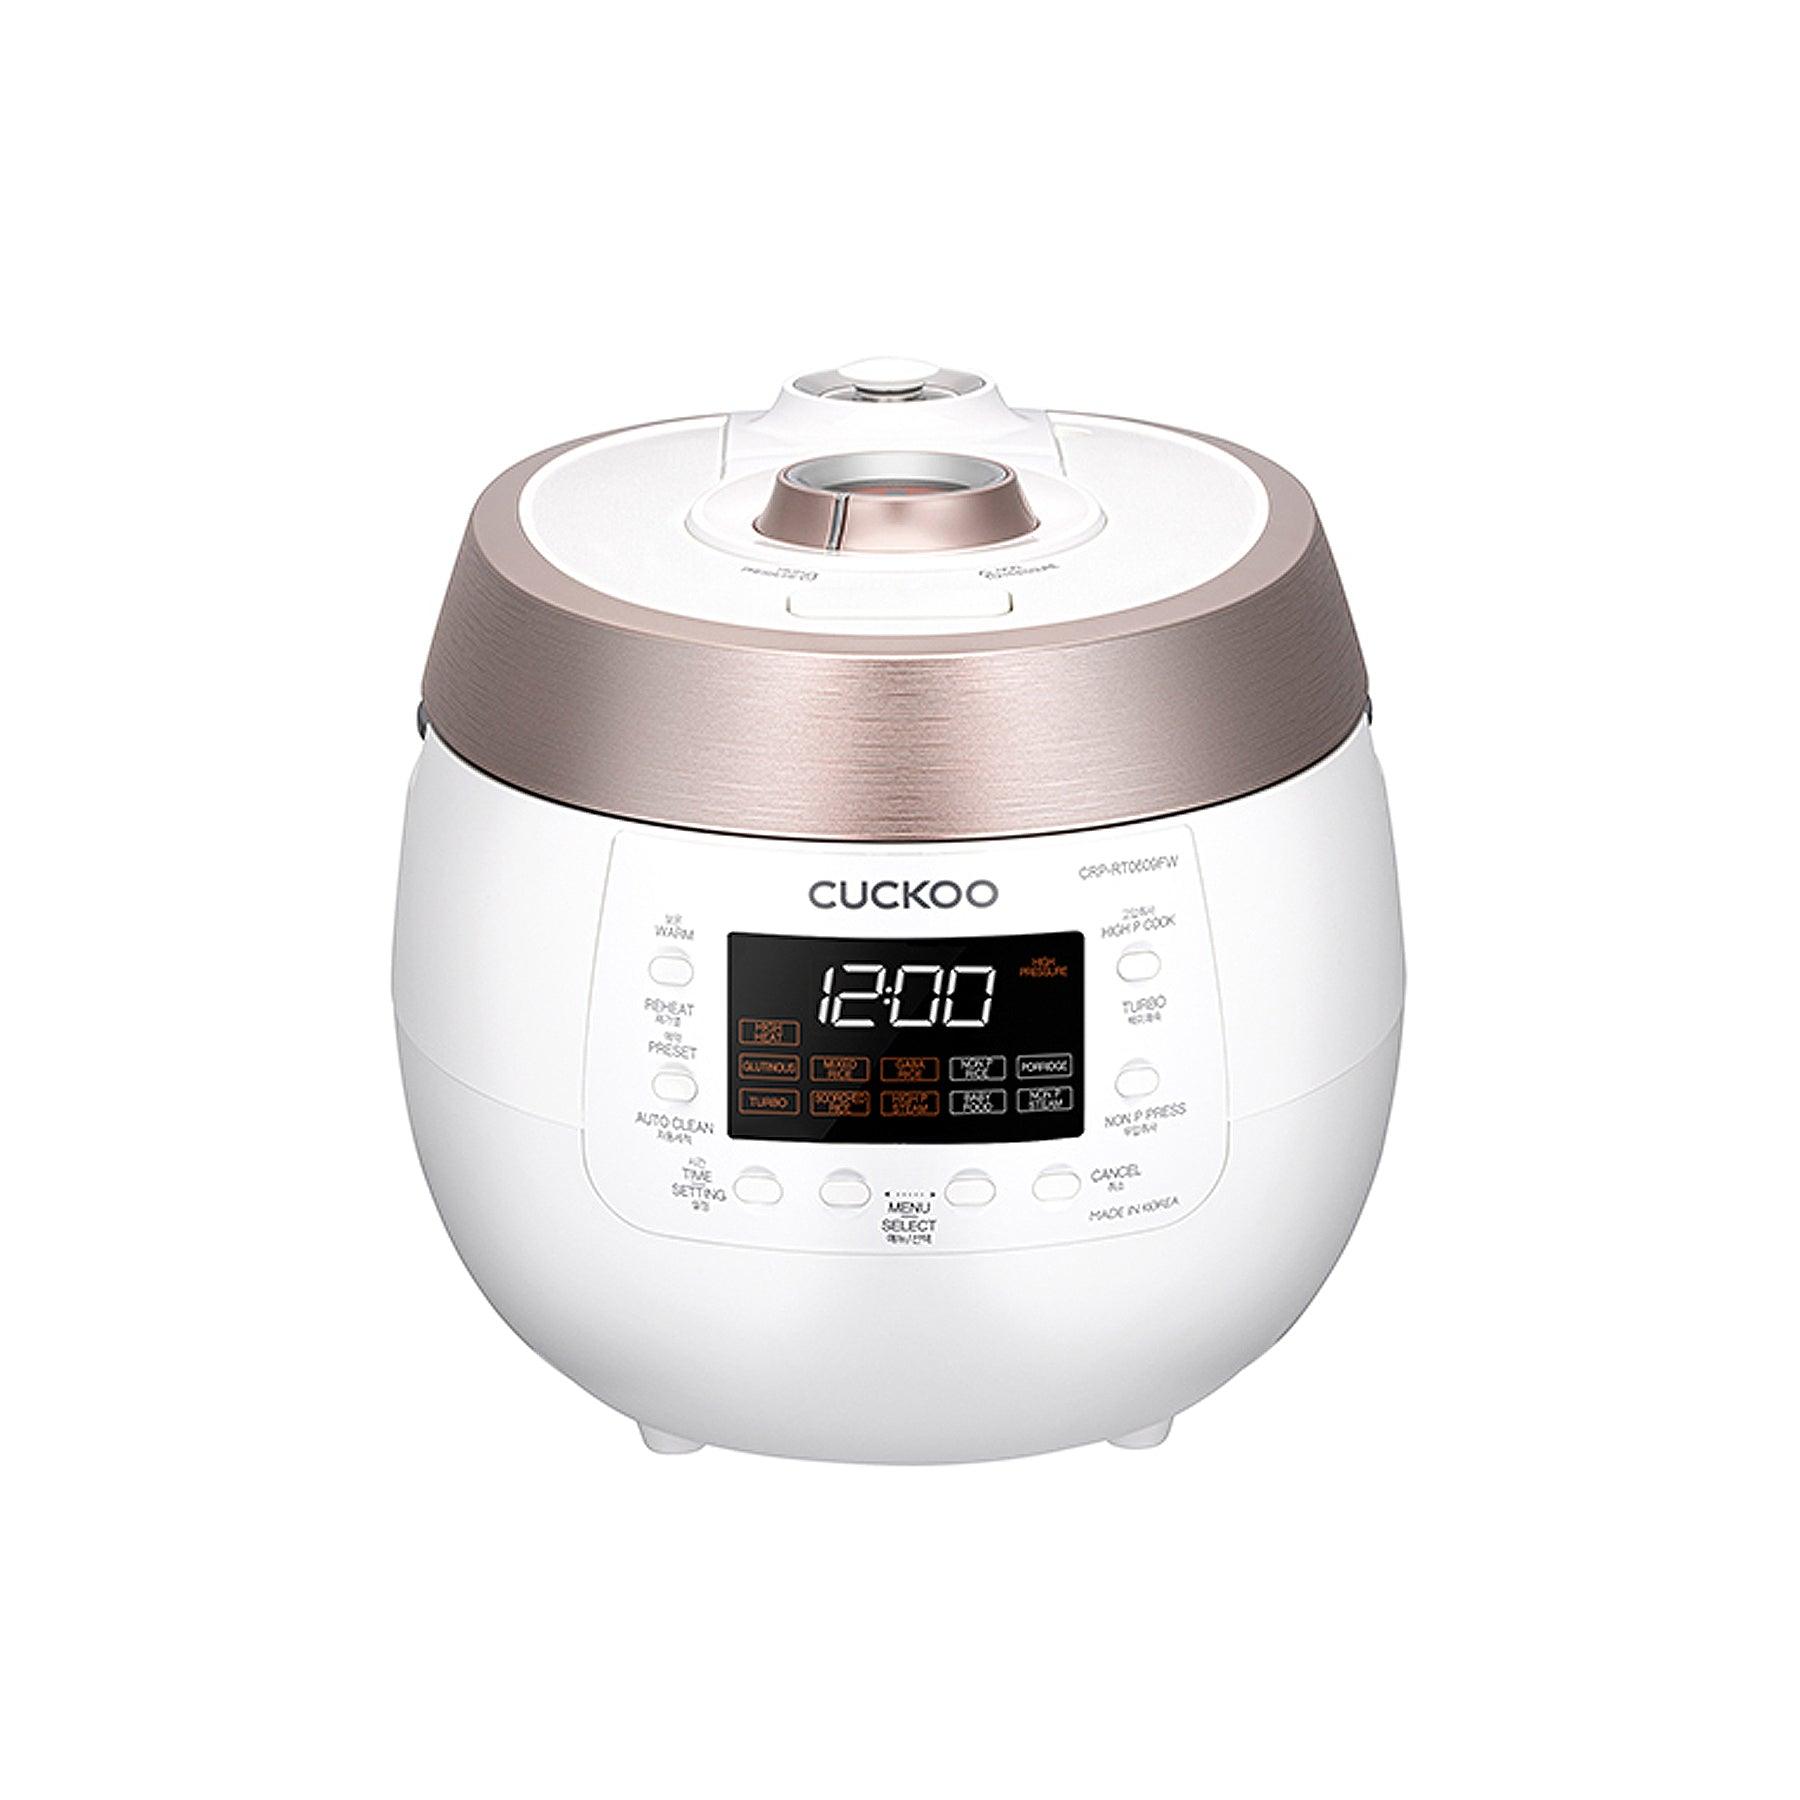 6-Cup Rice Cooker